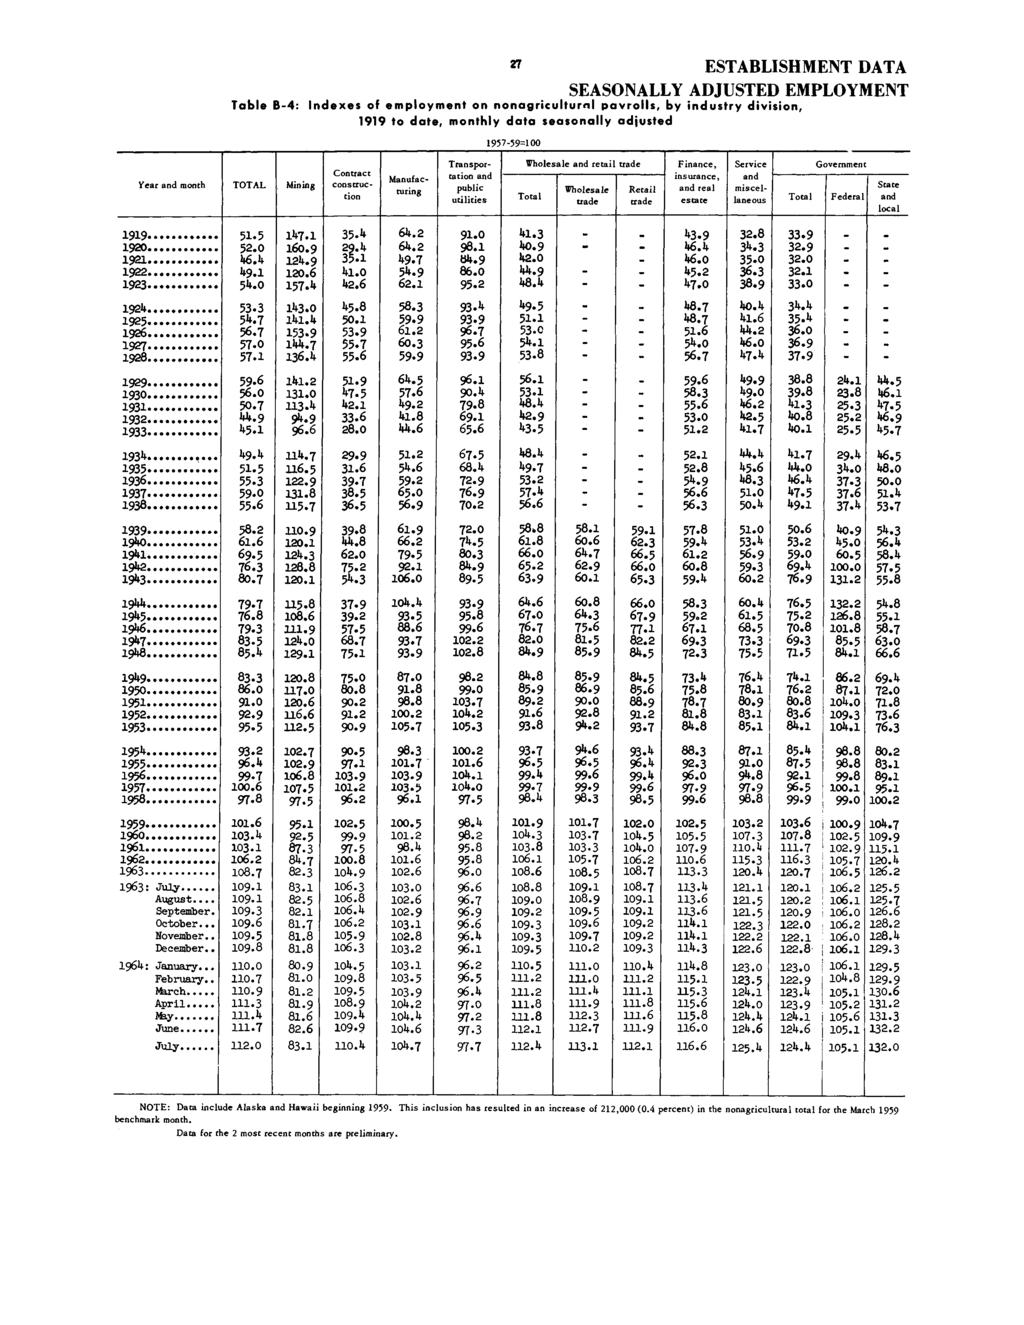 «SEASONALLY ADJUSTED EMPLOYMENT Table B-4: Indexes of employment on nonagriculturnl payrolls, by industry division, 1919 to date, monthly data seasonally adjusted 1957-59=100 Year and month Mining